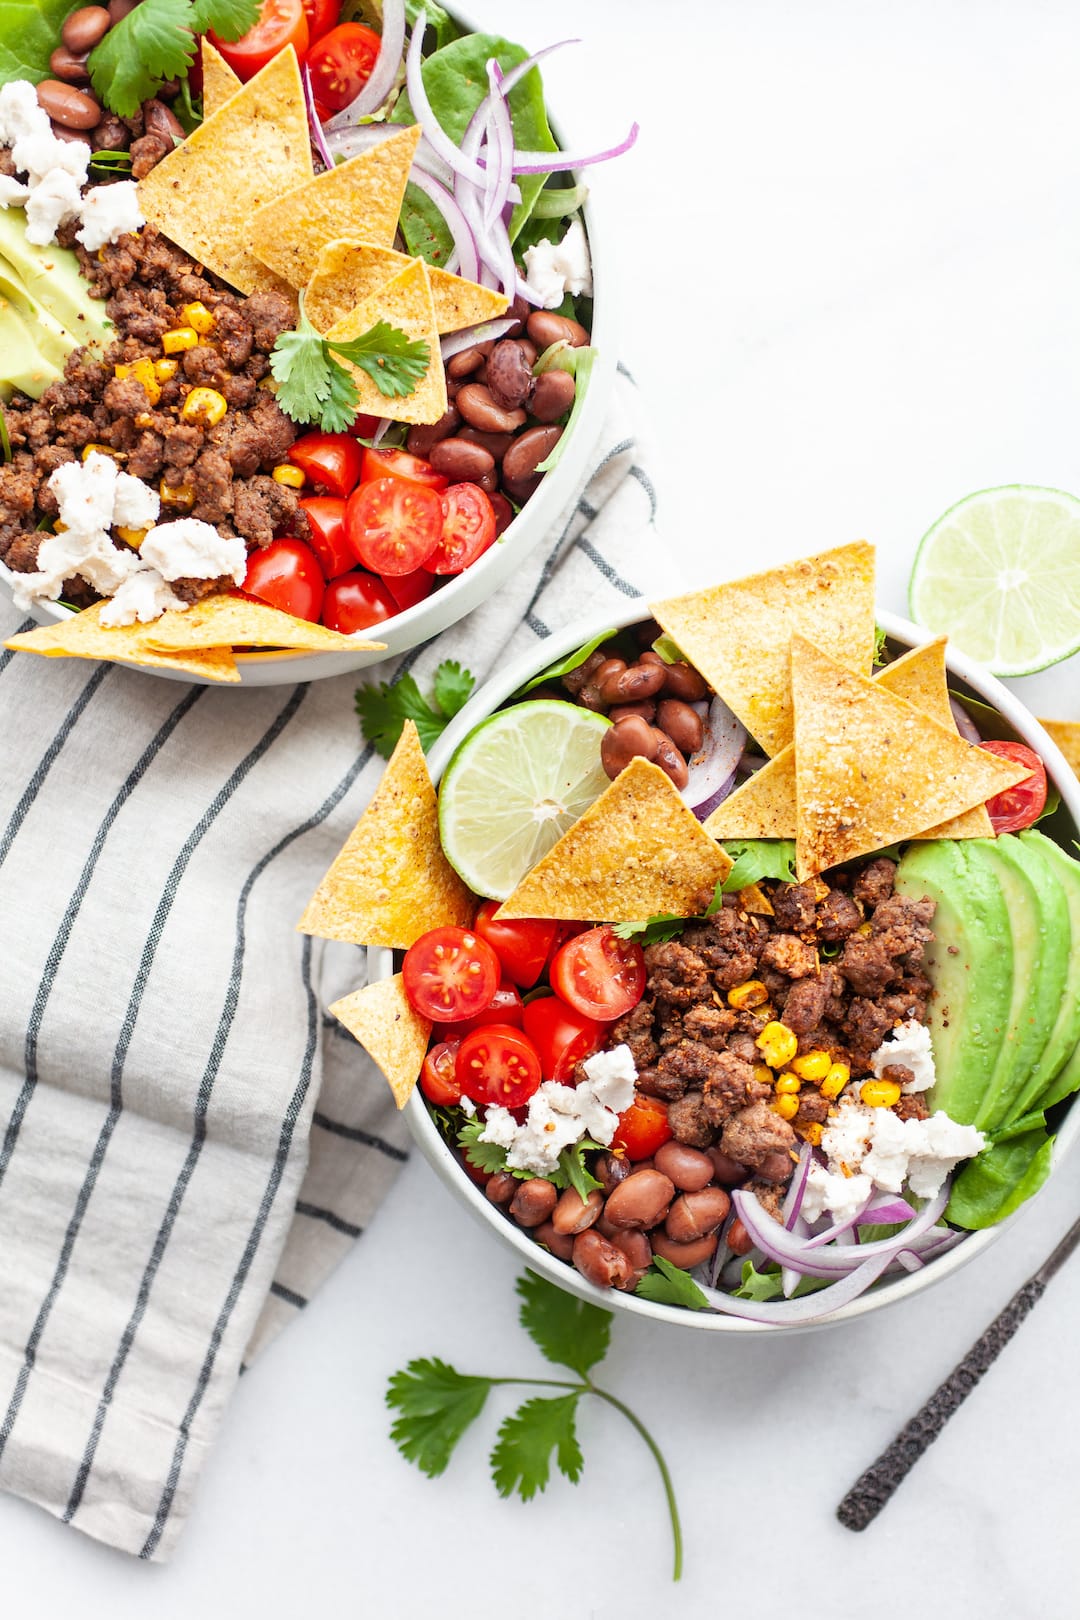 This delicious and easy healthy taco salad recipe is made with a simple salsa dressing, extra lean ground beef, veggies galore, corn, beans, dairy free cheese and quick baked tortilla chips. It’s a clean eating recipe that is perfect for meal prep and a filling lunch or dinner! 